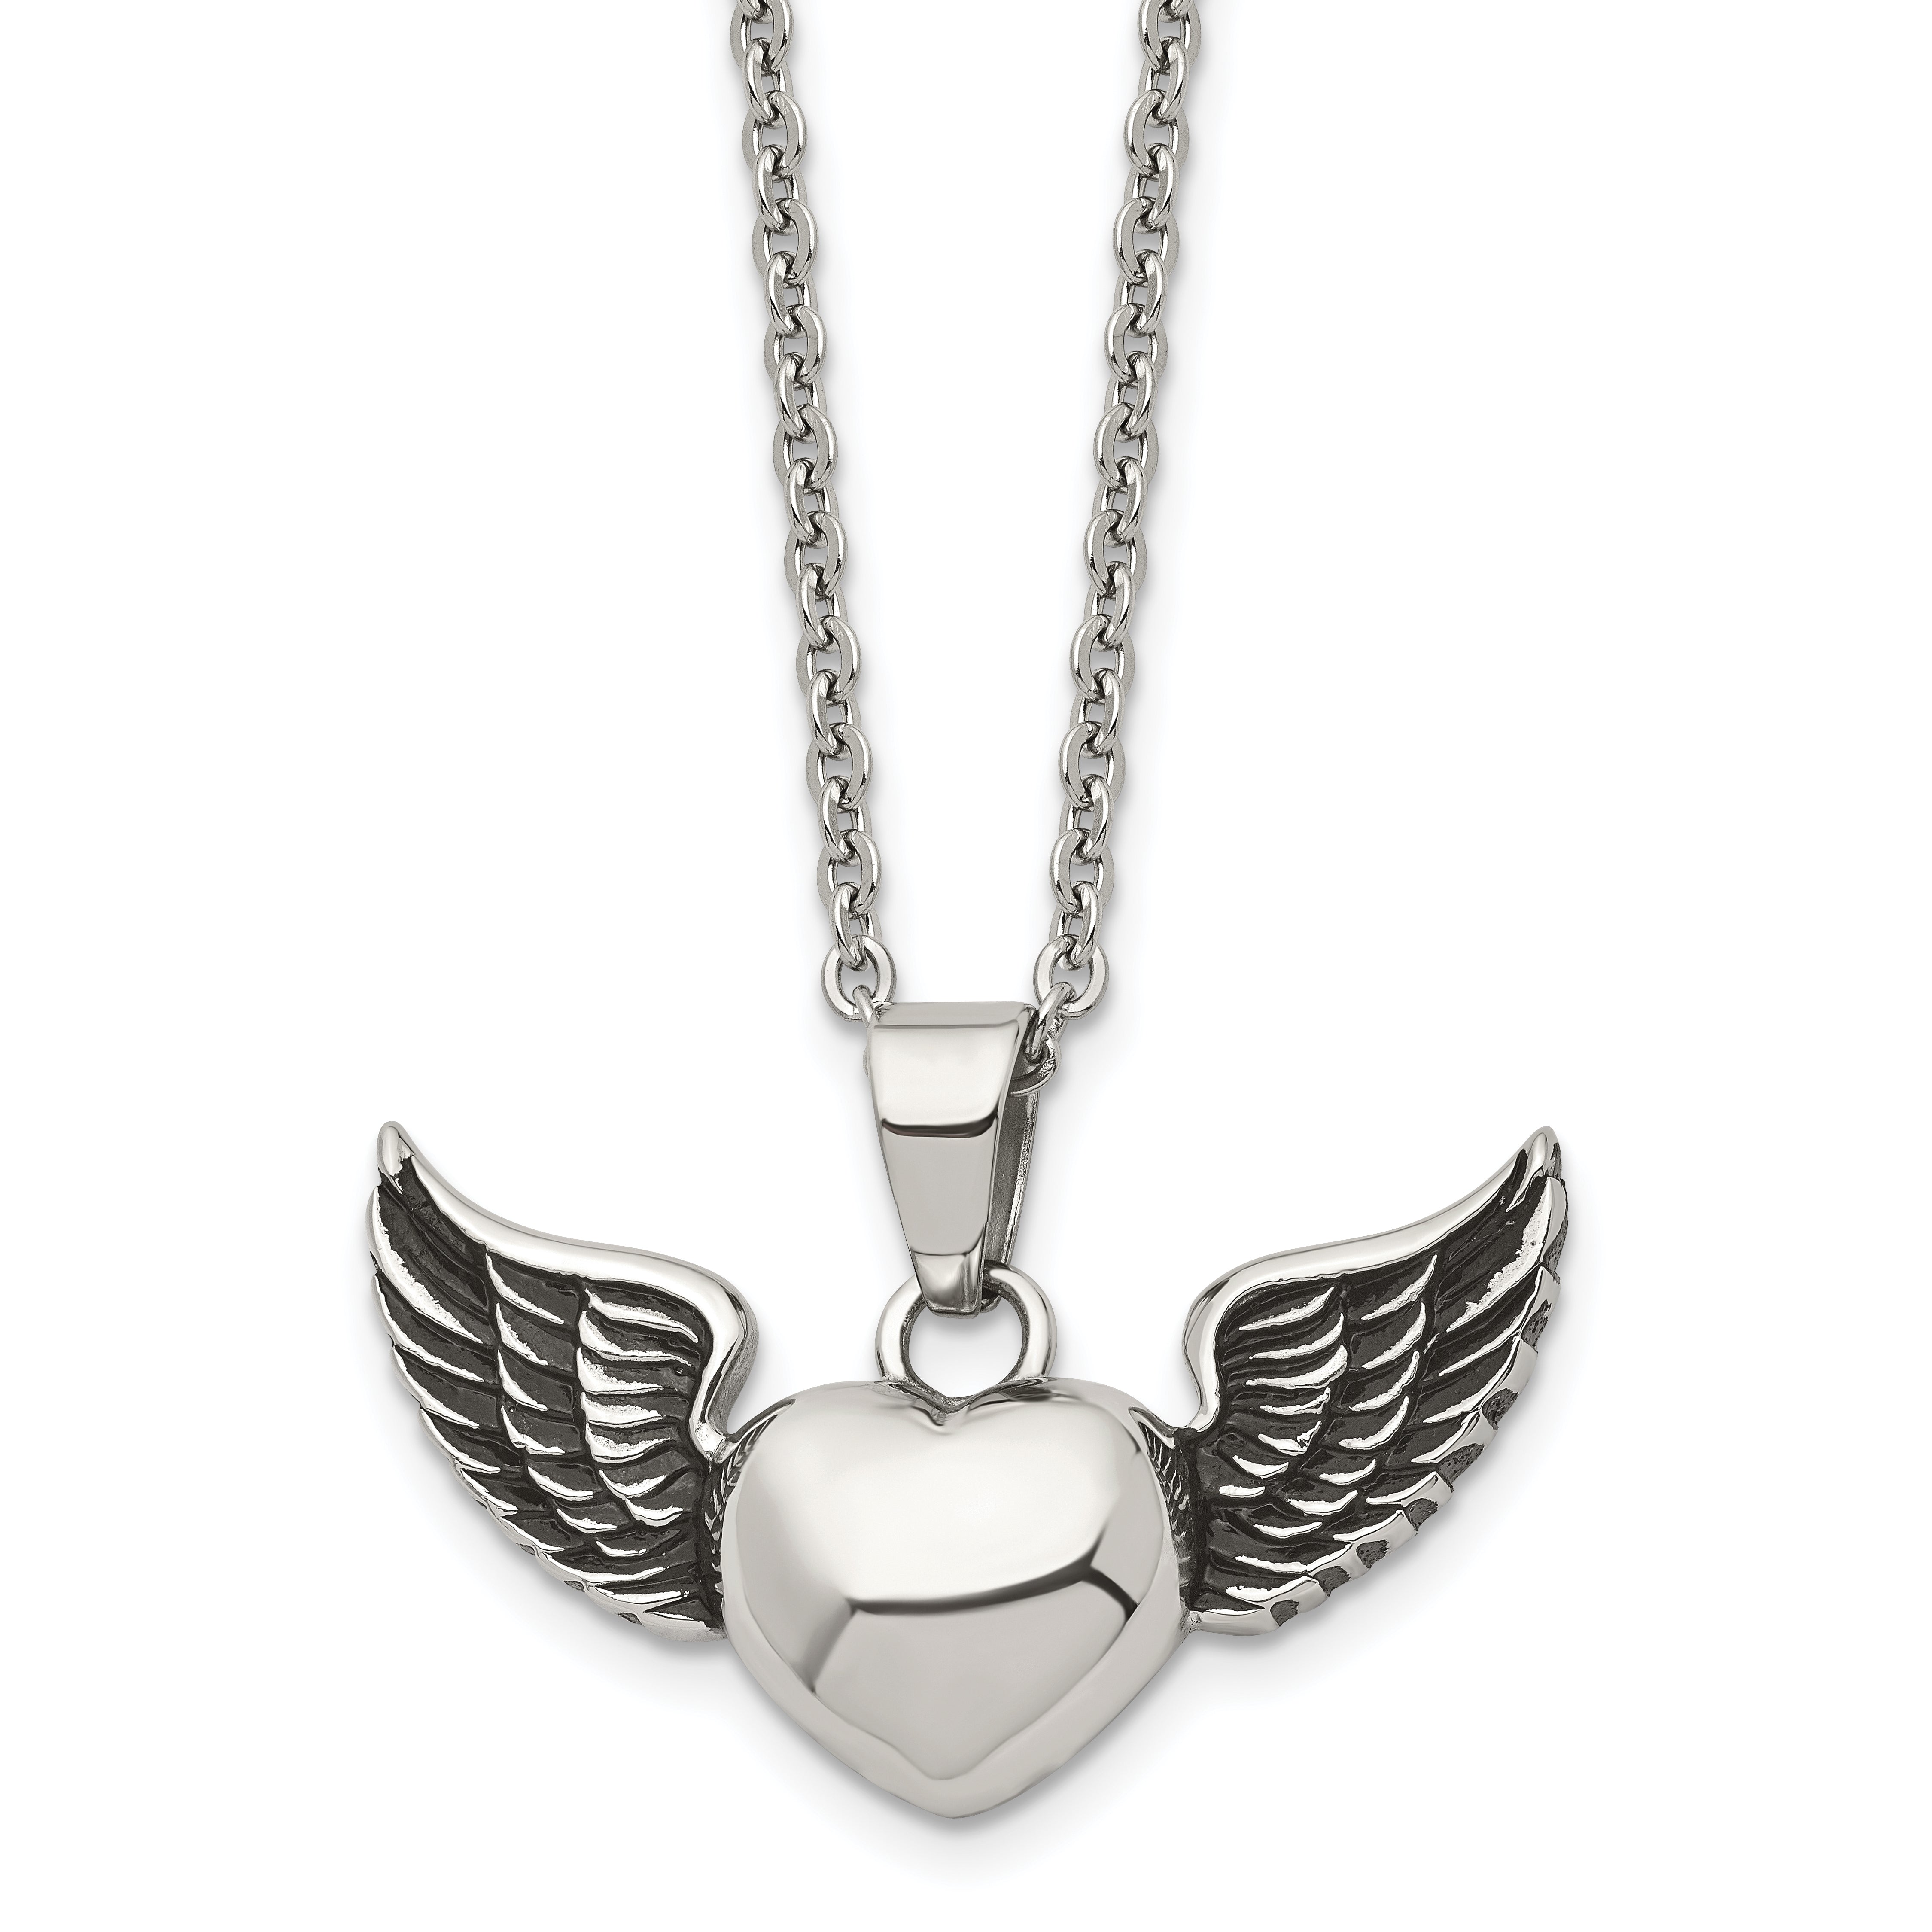 Chisel Stainless Steel Antiqued and Polished Heart with Wings Pendant on an 18 inch Cable Chain Necklace